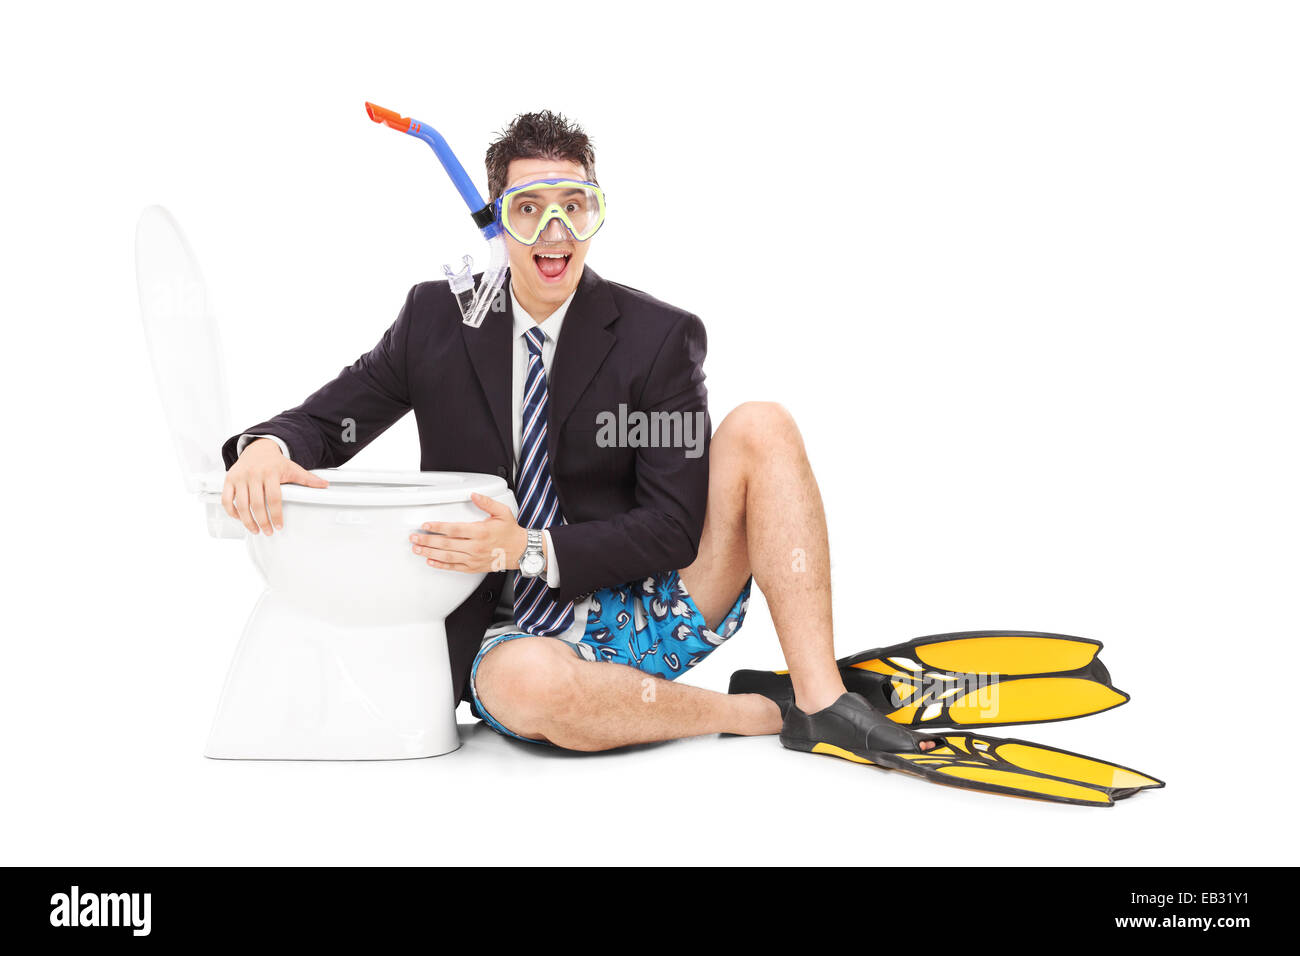 Man with suit and snorkel sitting by a toilet isolated on white background Stock Photo